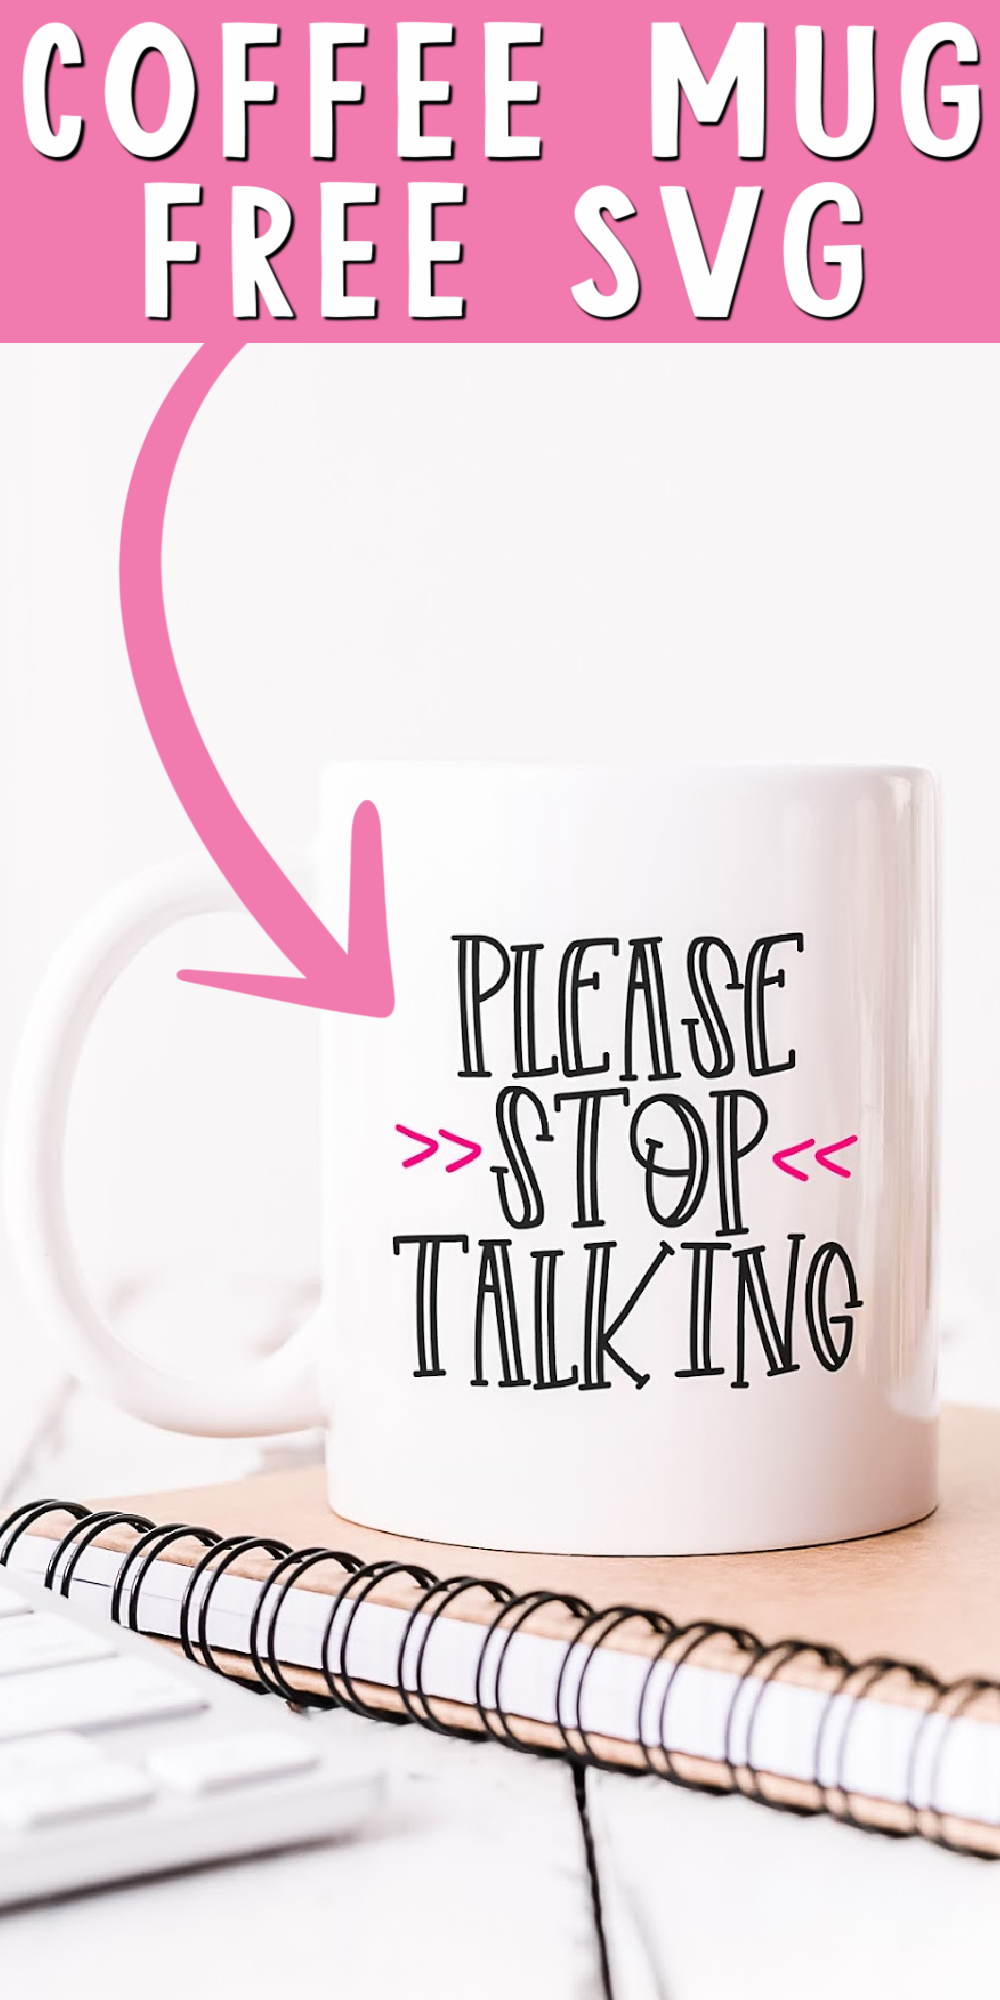 coffee-mug-svg "class =" wp-image-80281 "srcset =" https://www.thecountrychiccottage.net/wp-content/uploads/2021/03/coffee-mug-svg.png 1000w, https: / /www.thecountrychiccottage.net/wp-content/uploads/2021/03/coffee-mug-svg-150x300.png 150w, https://www.thecountrychiccottage.net/wp-content/uploads/2021/03/coffee- mug-svg-512x1024.png 512w, https://www.thecountrychiccottage.net/wp-content/uploads/2021/03/coffee-mug-svg-768x1536.png 768wottage, https://www.thecountrychiccottage.net/ wp-content / uploads / 2021/03 / coffee-mug-svg-610x1220.png 610w "data-lazy-tailles =" (largeur max: 1000px) 100vw, 1000px "data-pin-media =" https: // www.thecountrychiccottage.net/wp-content/uploads/2021/03/coffee-mug-svg.png "src =" https://www.thecountrychiccottage.net/wp-content/uploads/2021/03/coffee-mug -svg.png "/><noscript><img loading=